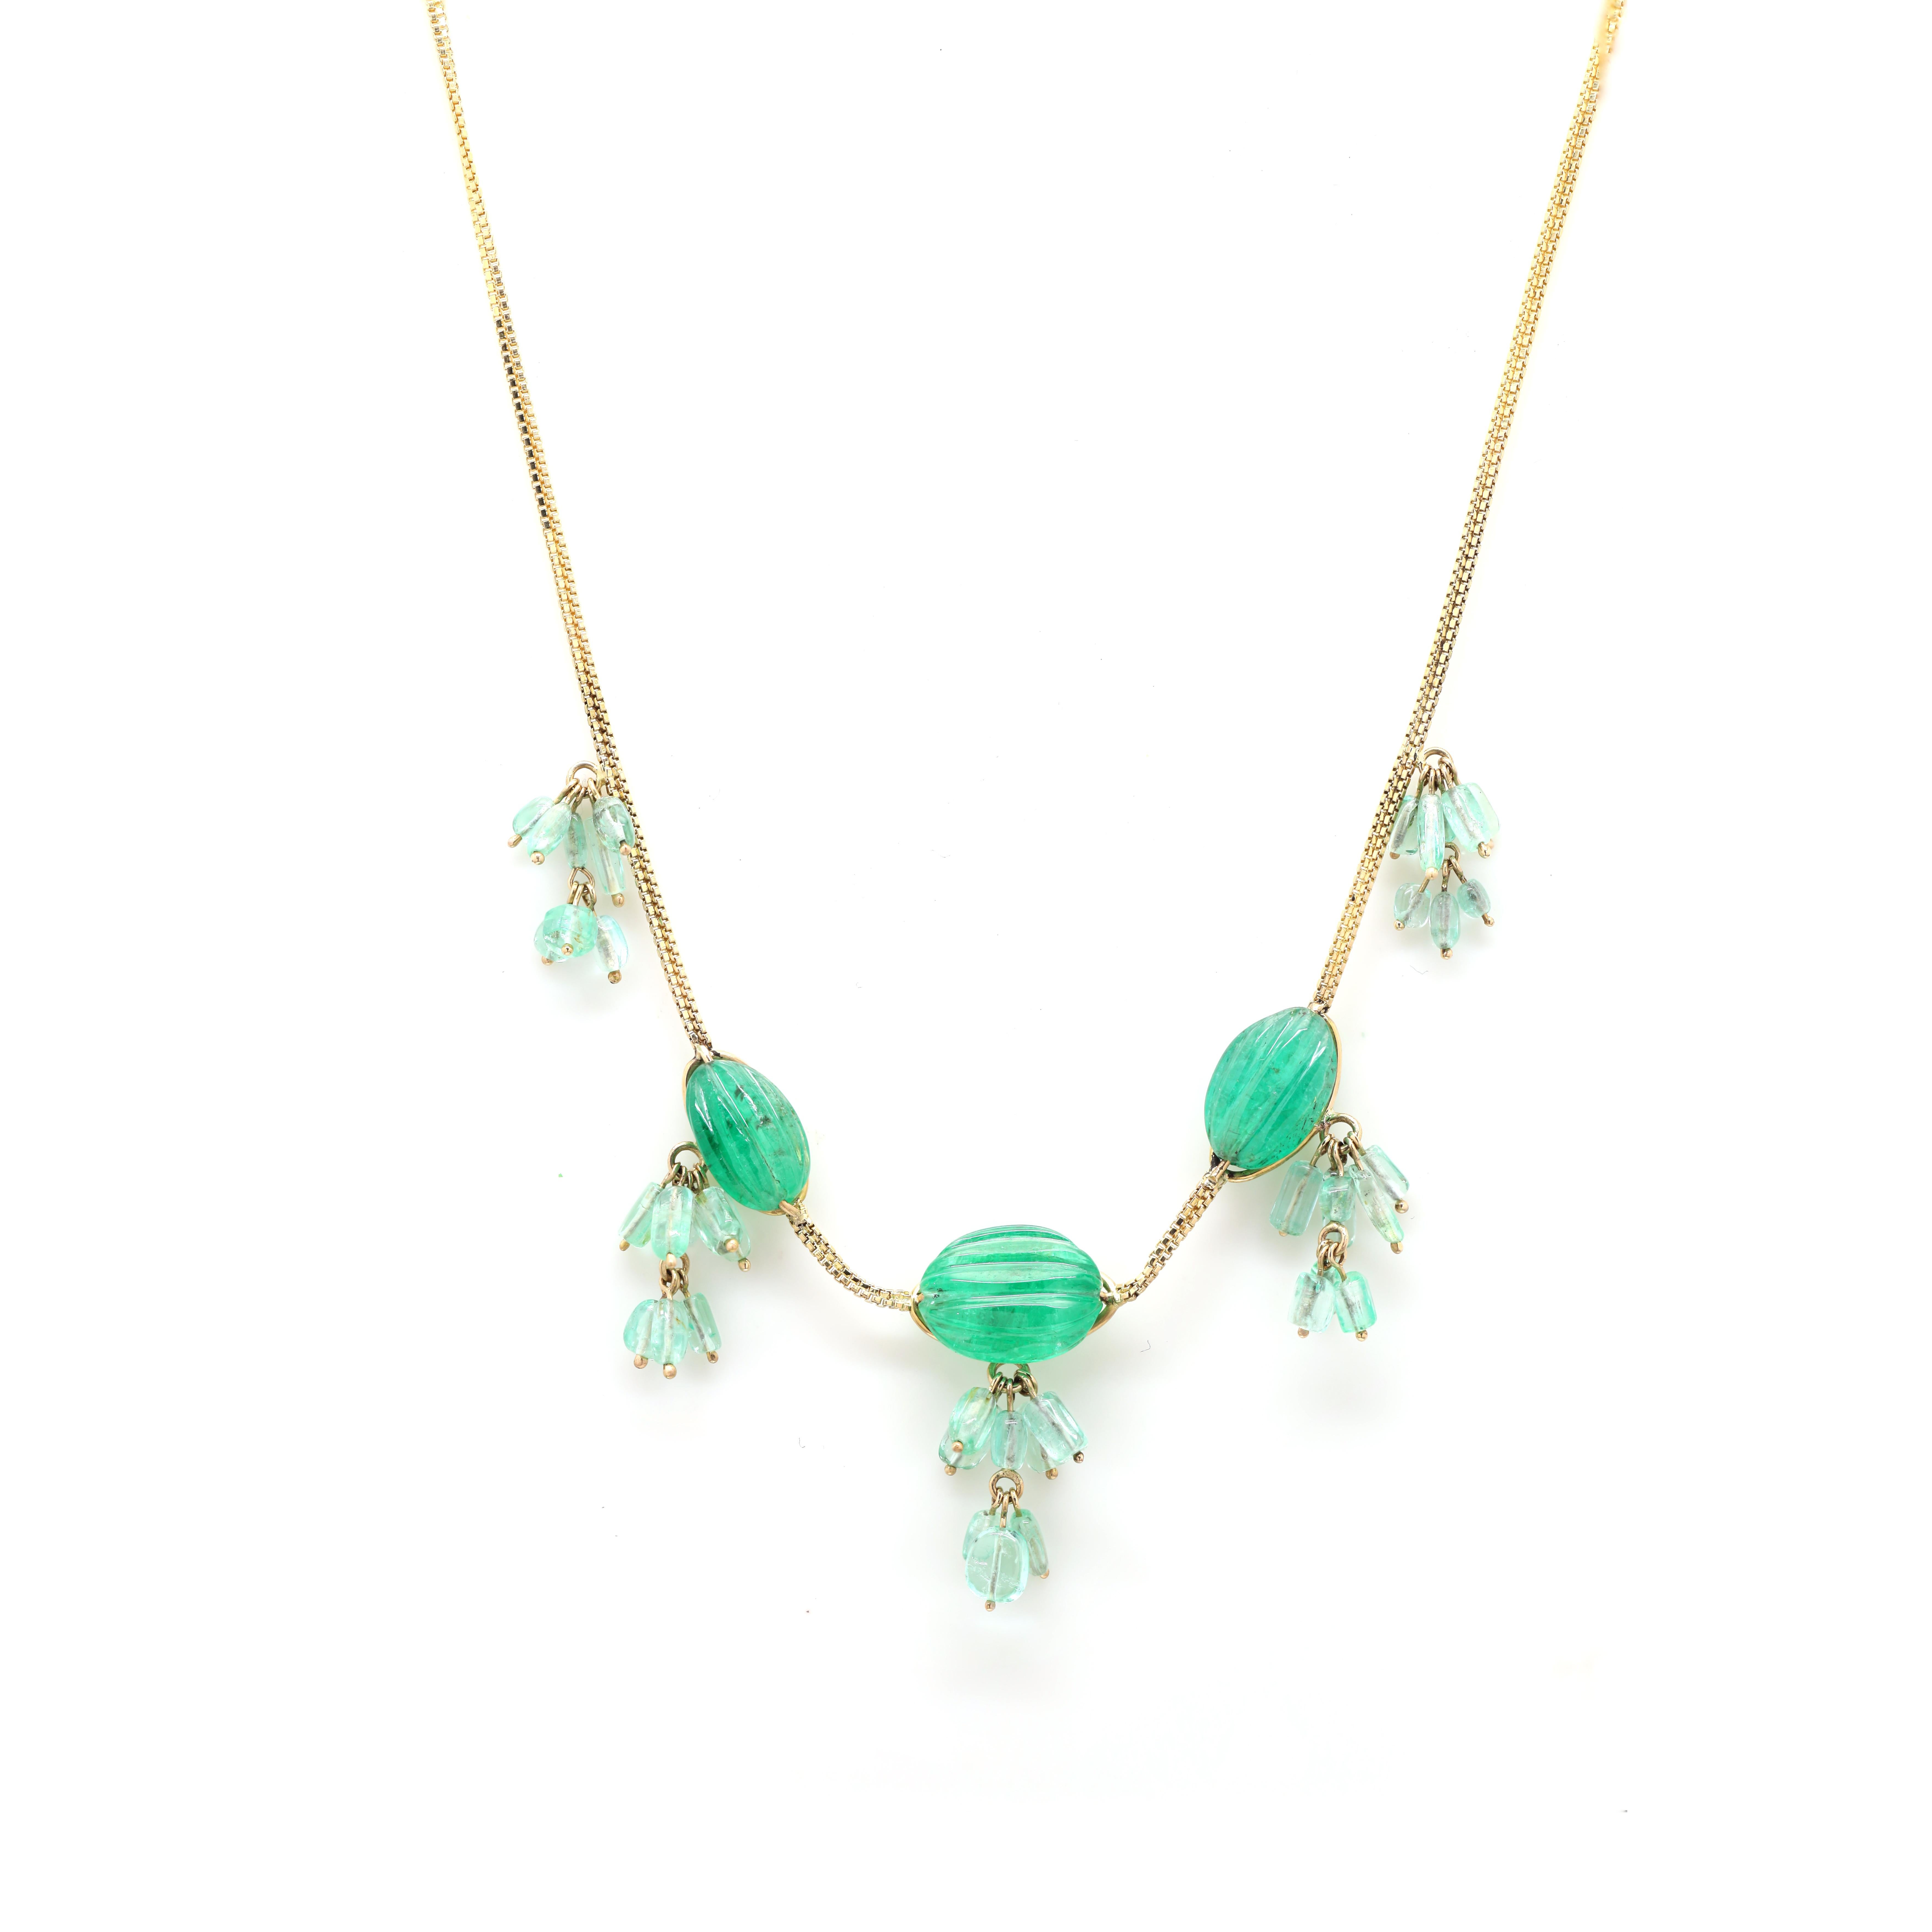 Beaded Emerald Chain Necklace in 18K gold with tumble emerald gemstones. Lightweight and gorgeous, this is a great bridesmaid, wedding gift for anyone on your list.
Accessorize your look with this elegant emerald pendant chain necklace. This